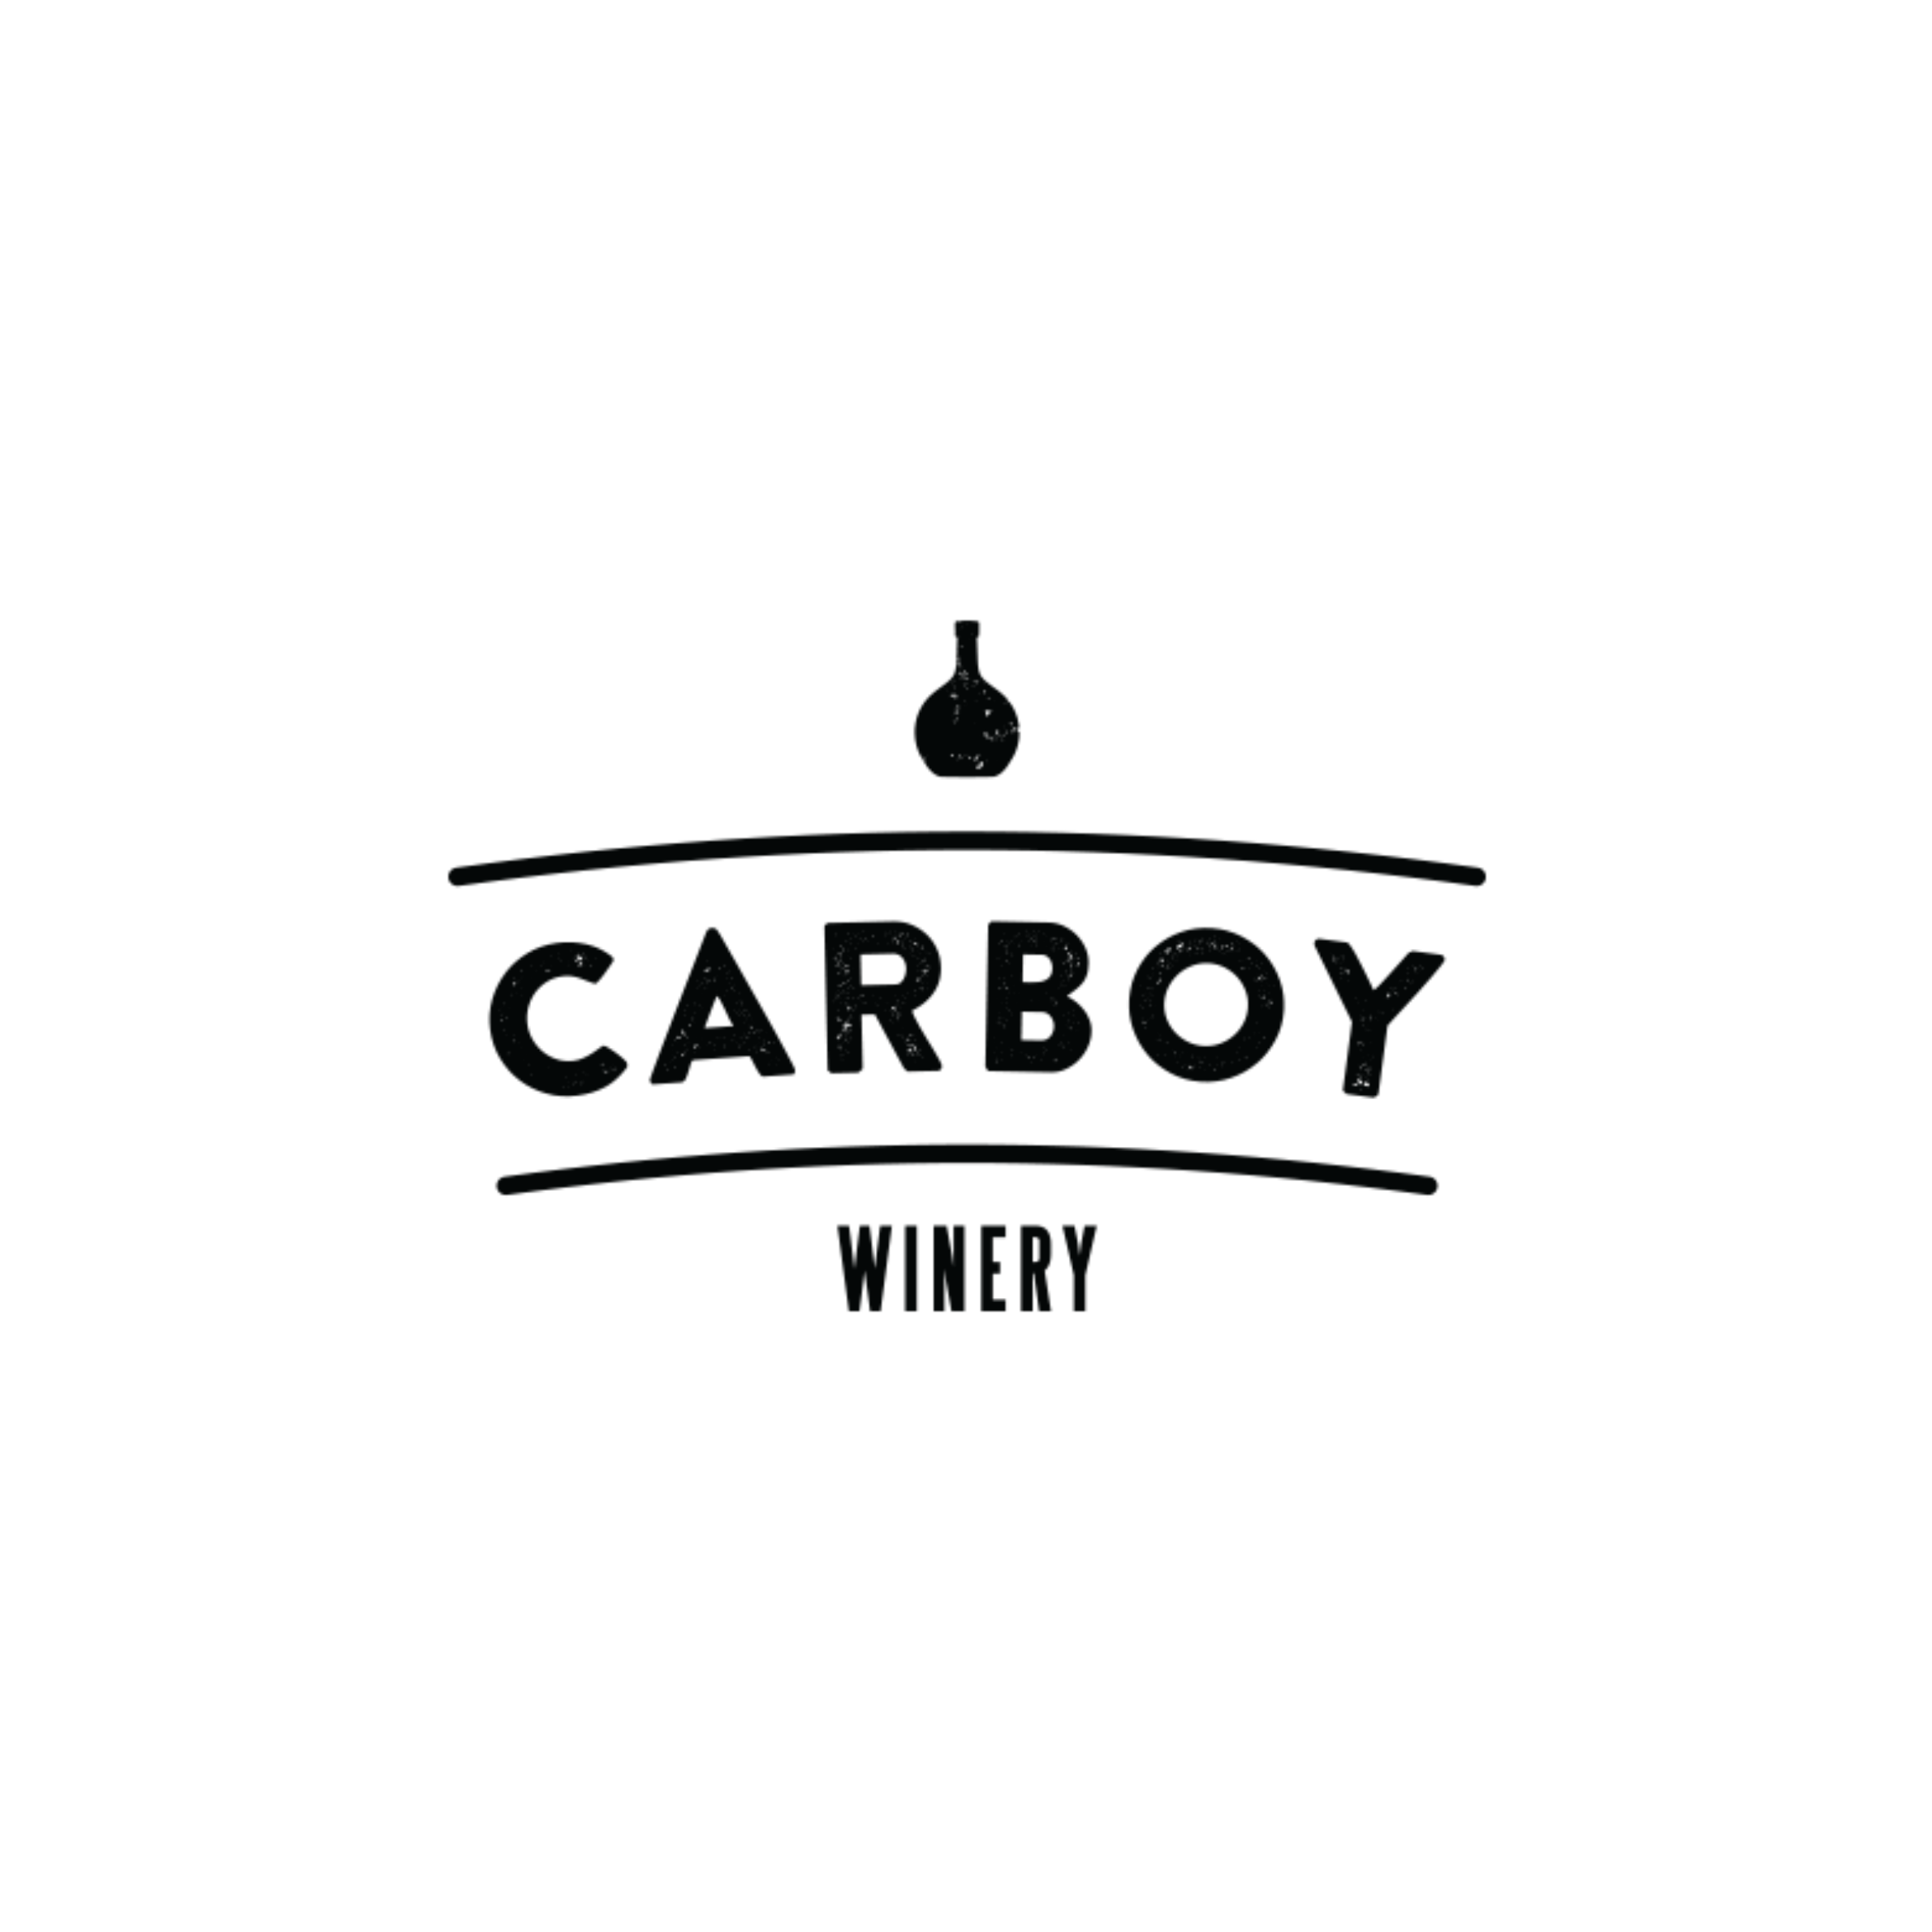 Carboy Winery